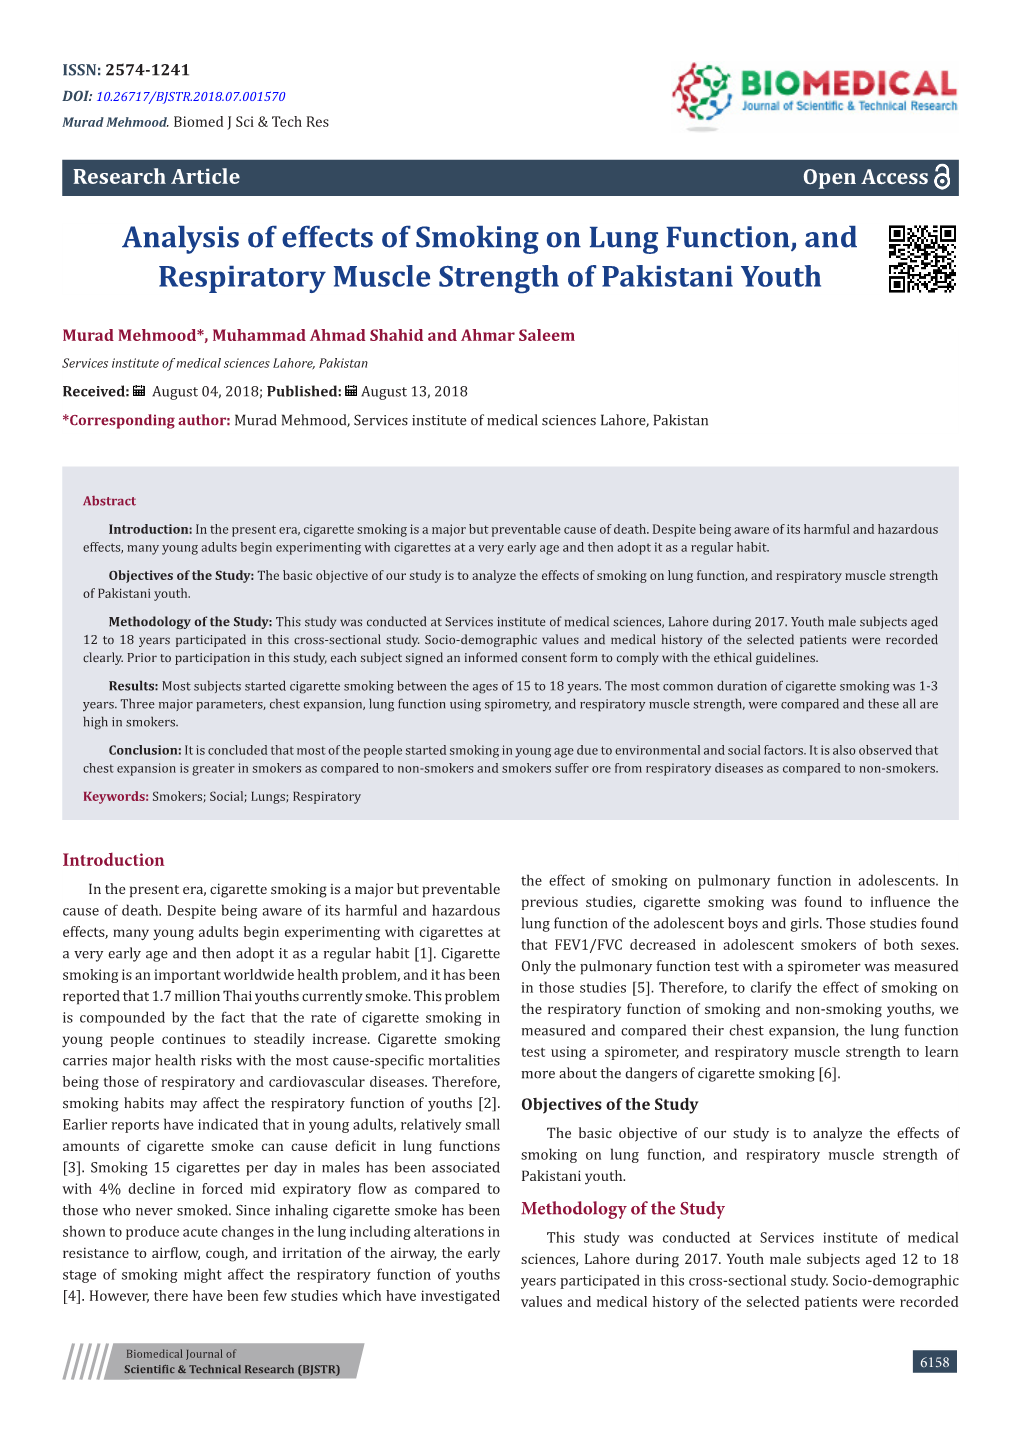 Analysis of Effects of Smoking on Lung Function, and Respiratory Muscle Strength of Pakistani Youth